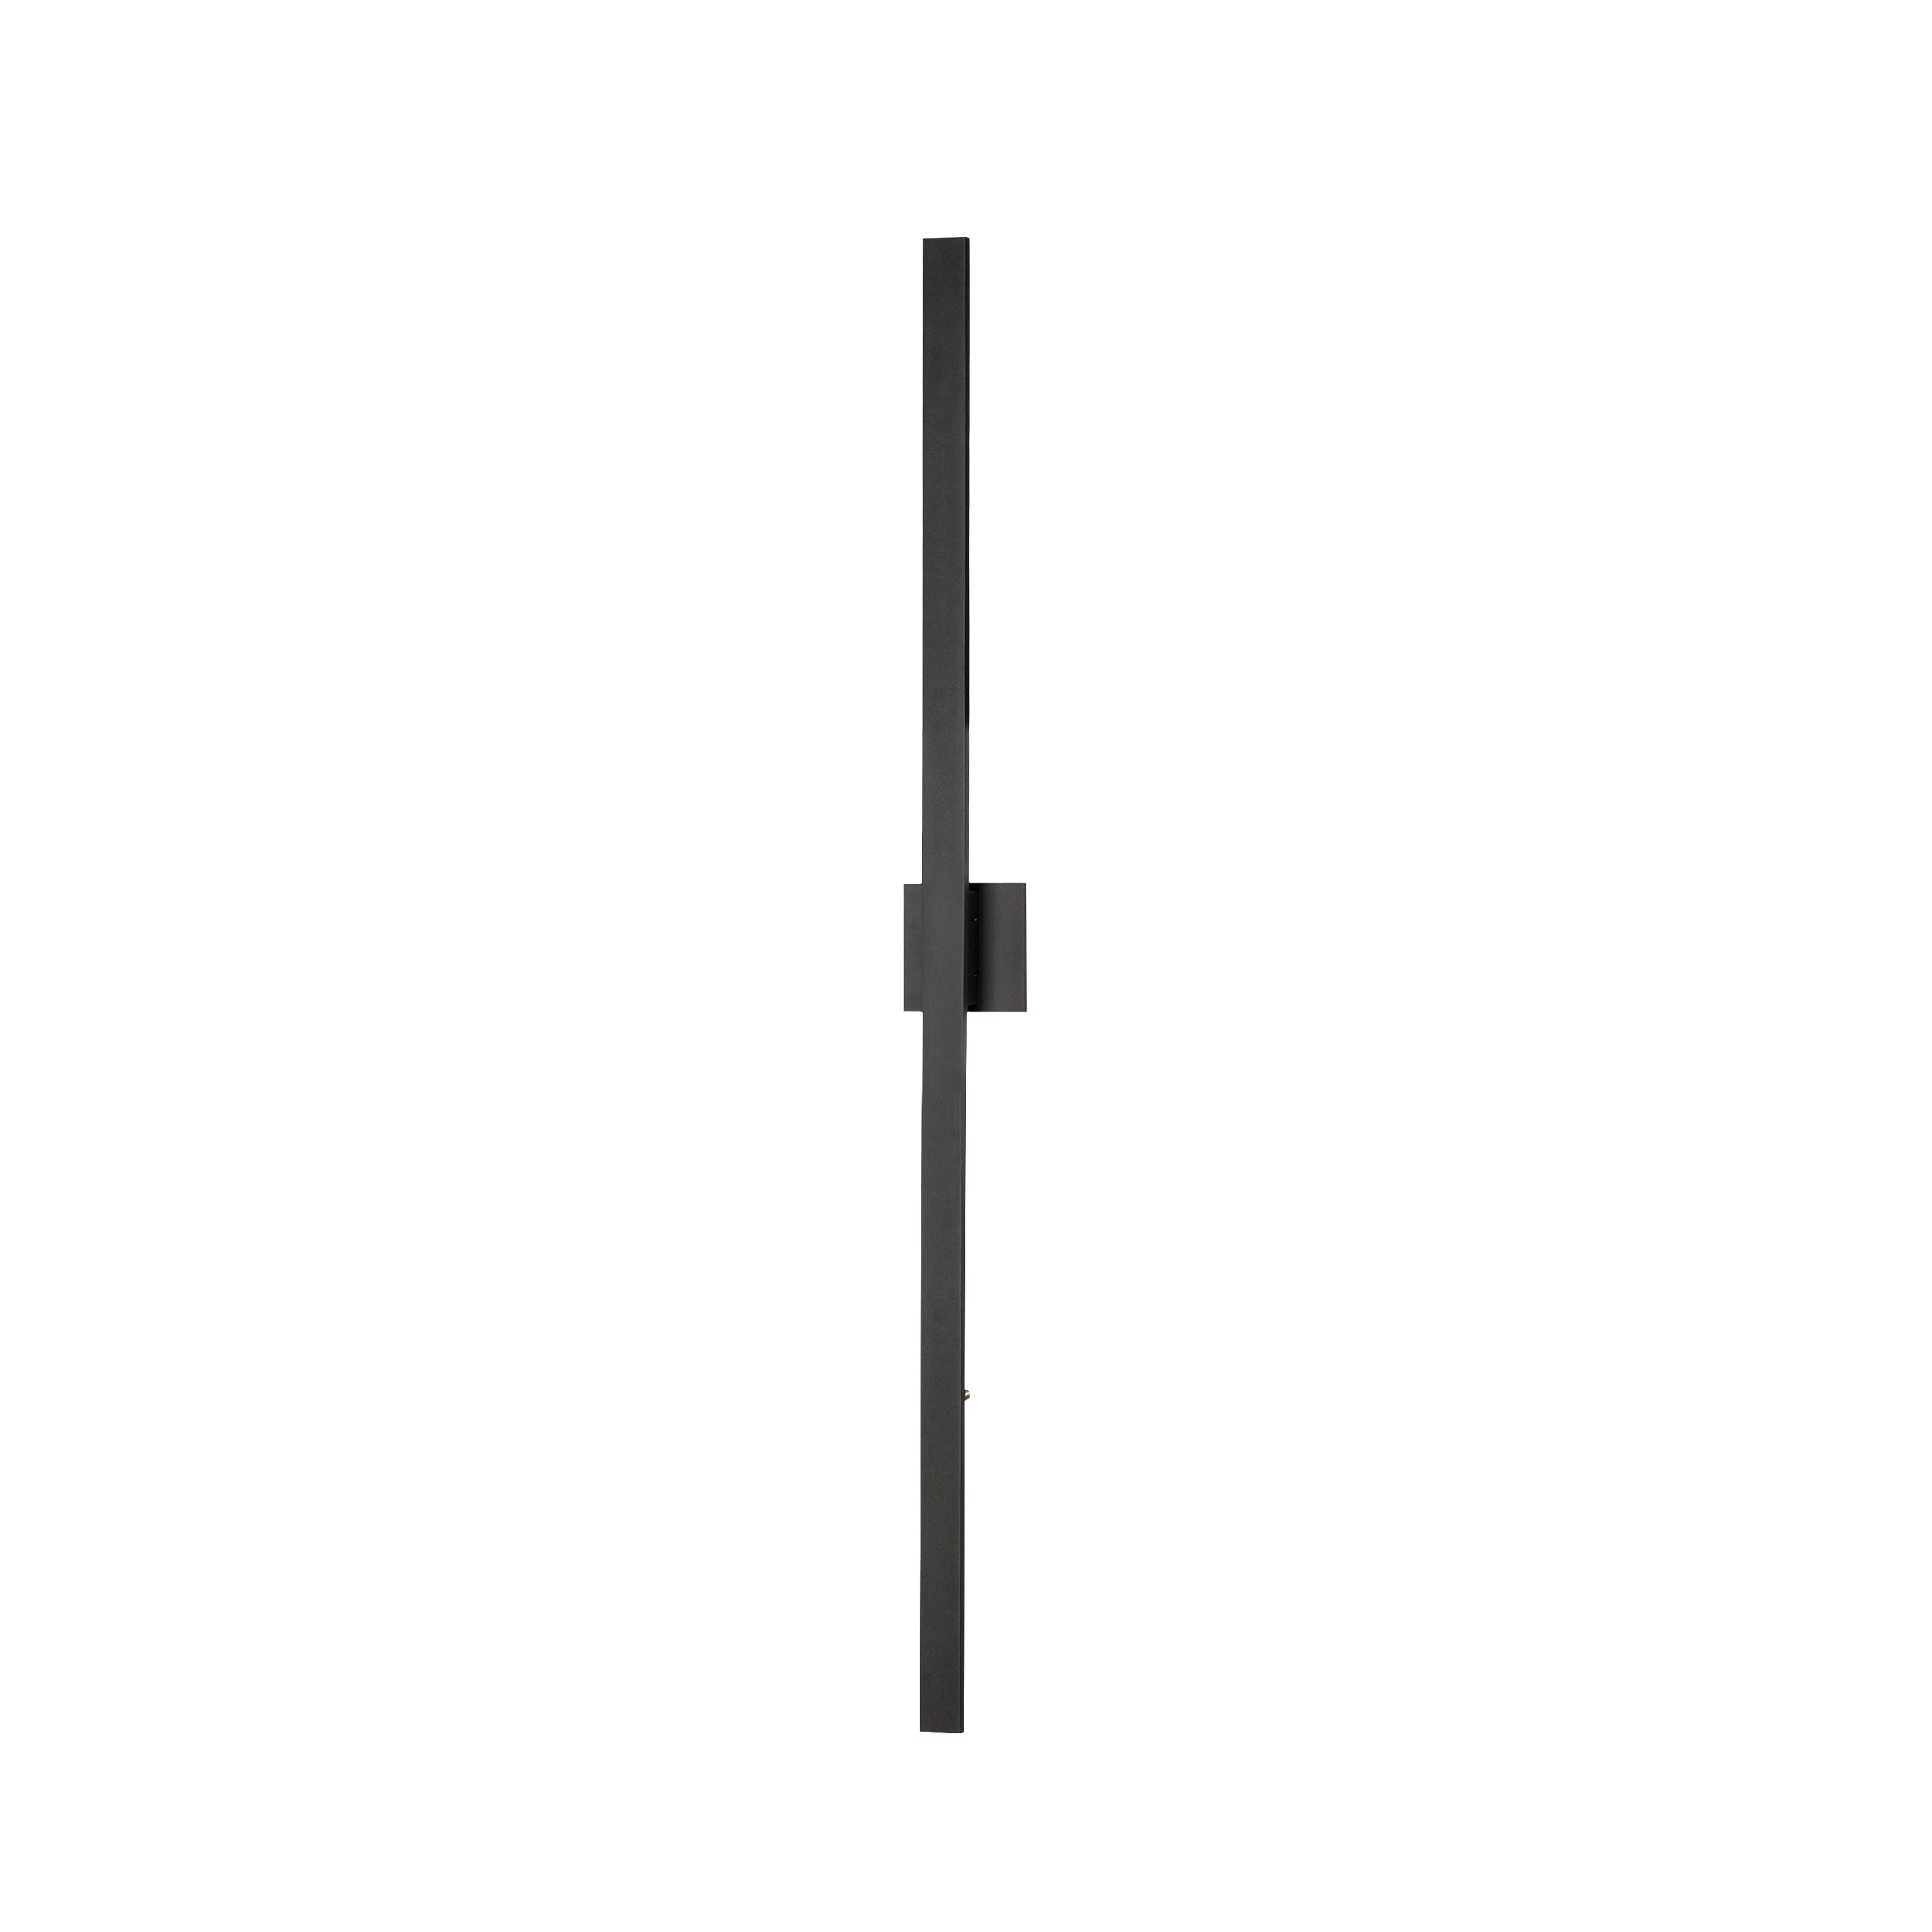 ALUMI LUX LINE Outdoor wall sconce Black INTEGRATED LED - E41344-BK | MAXIM/ET3